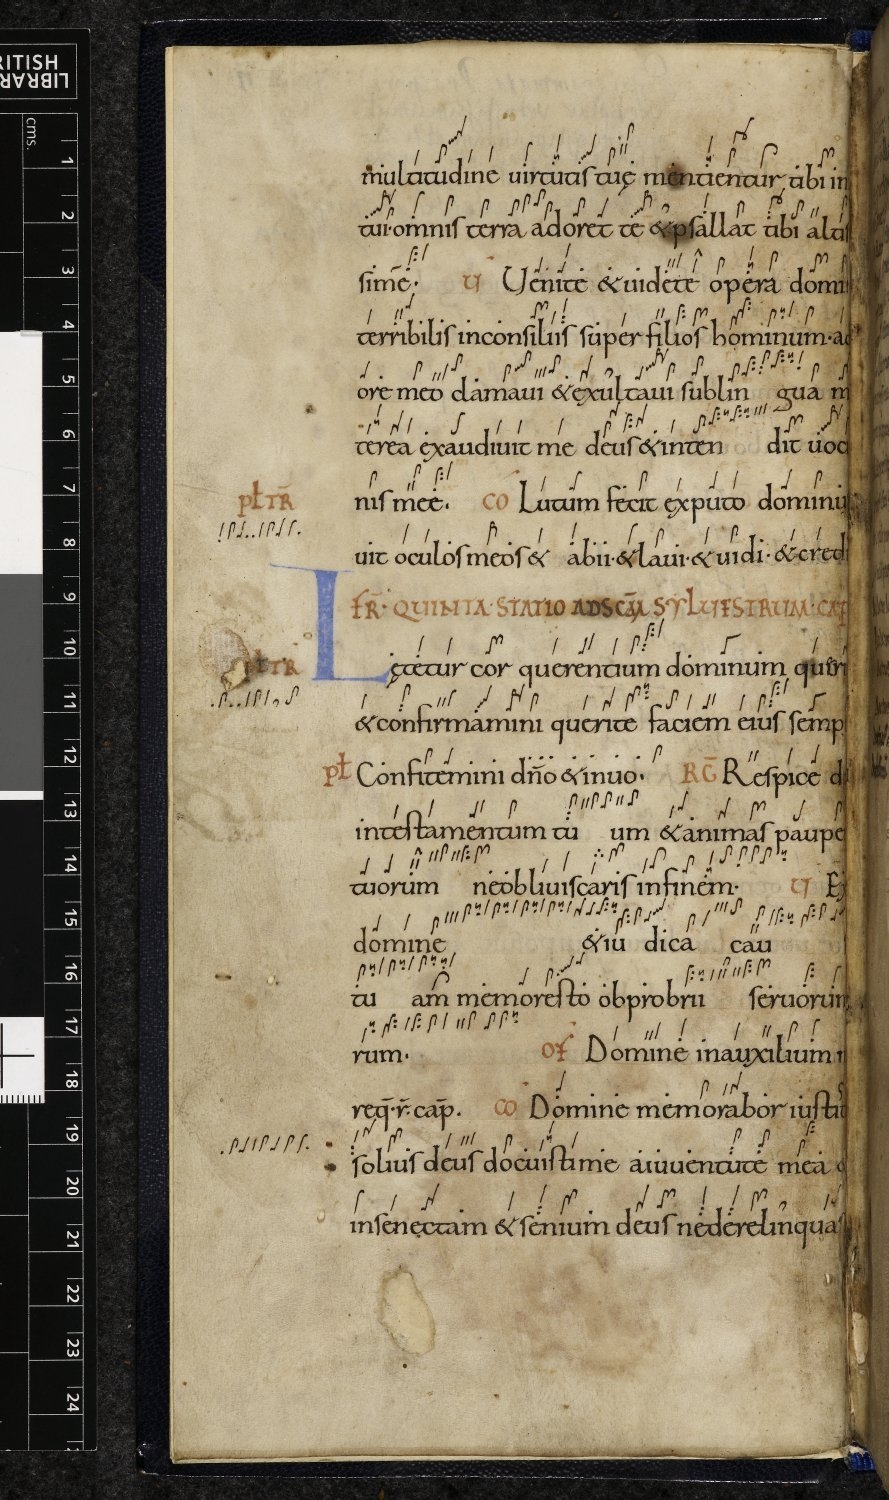 Image of a leaf from a Gradual, written in Latin. It shows an initial and musical notation in Anglo-Saxon neumes. 